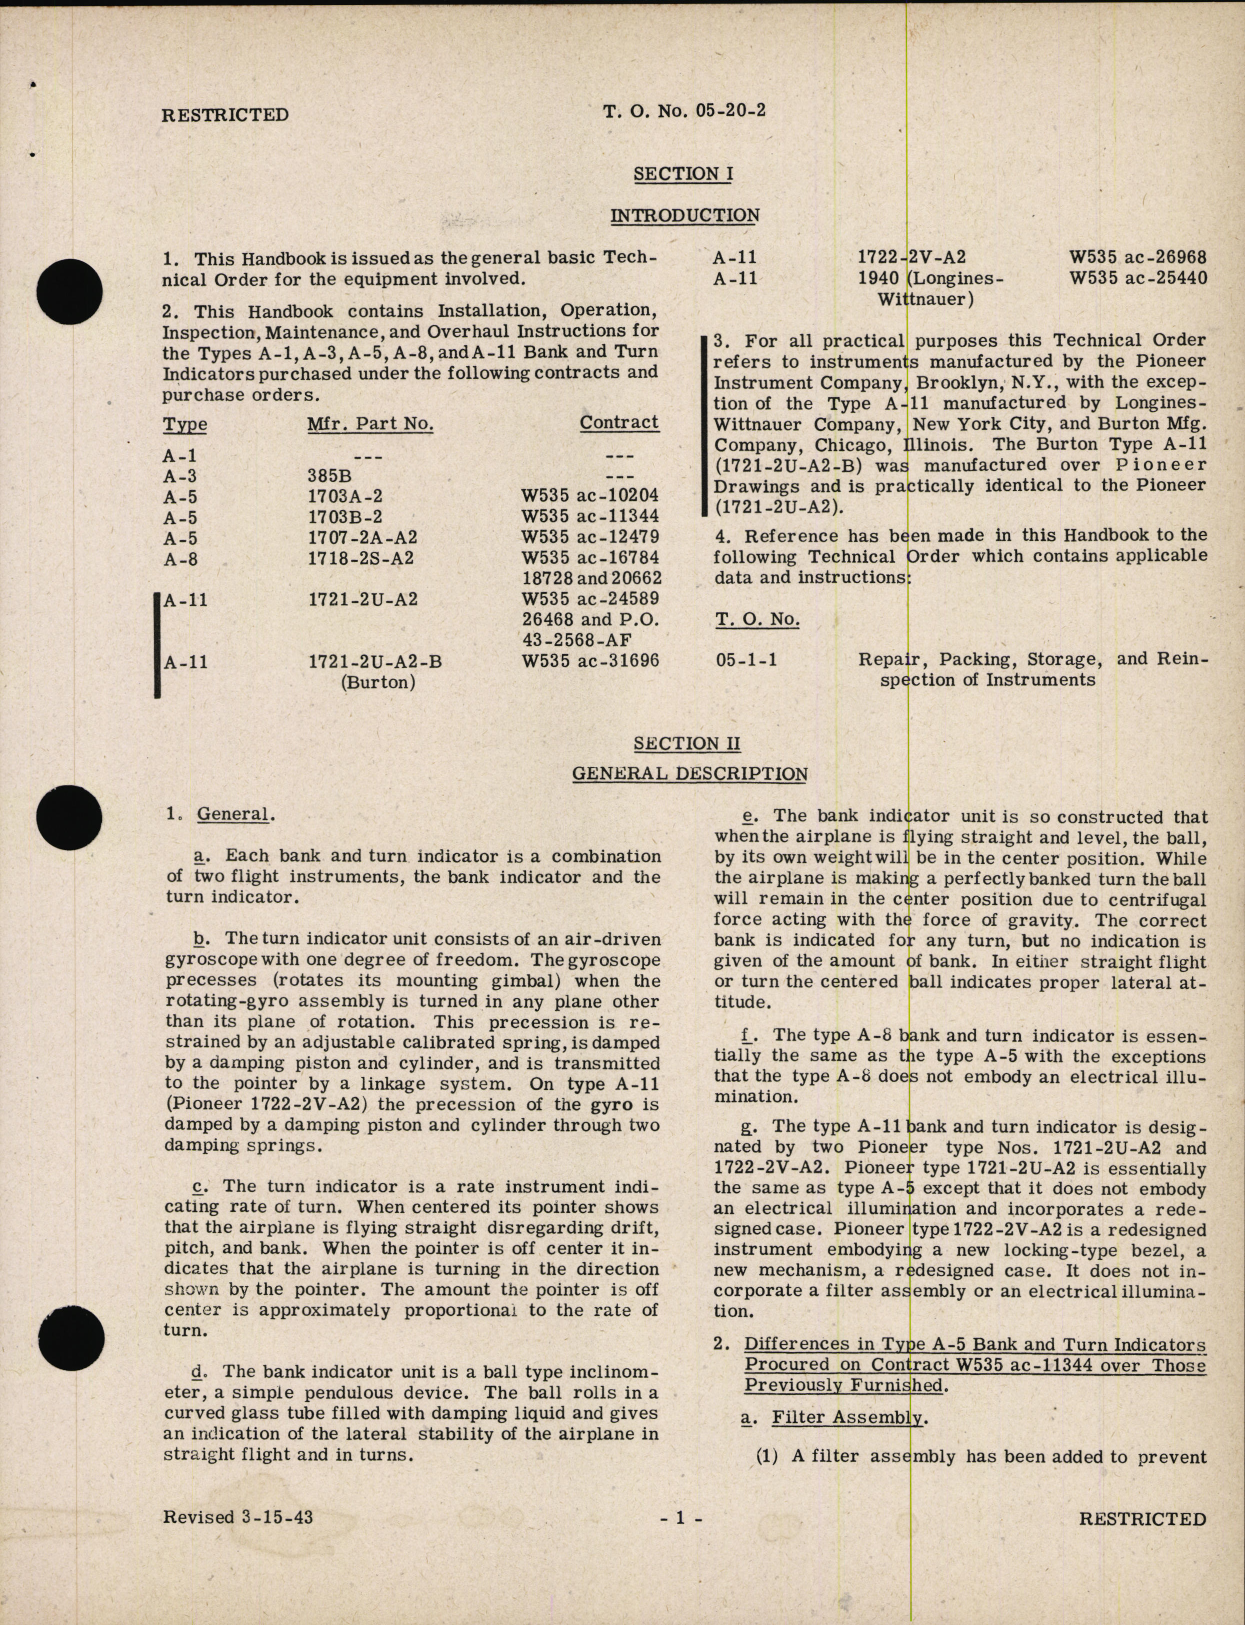 Sample page 7 from AirCorps Library document: Handbook of Instructions with Parts Catalog for Bank and Turn Indicators